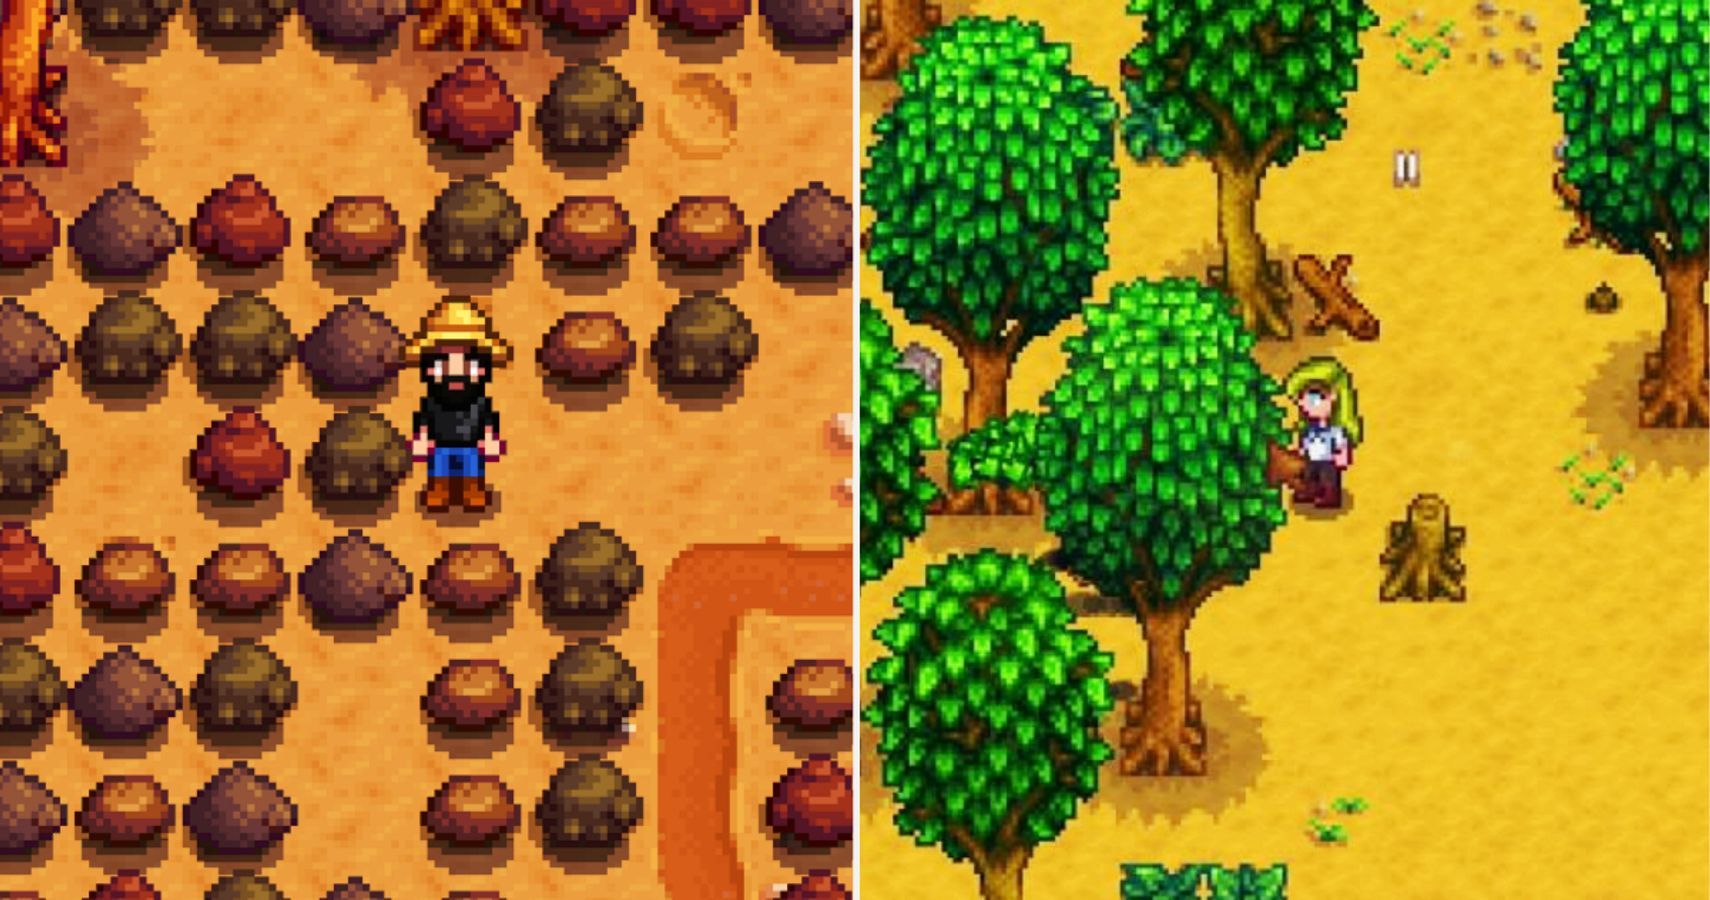 Stardew Valley: Basic Resource Farming Guide. 